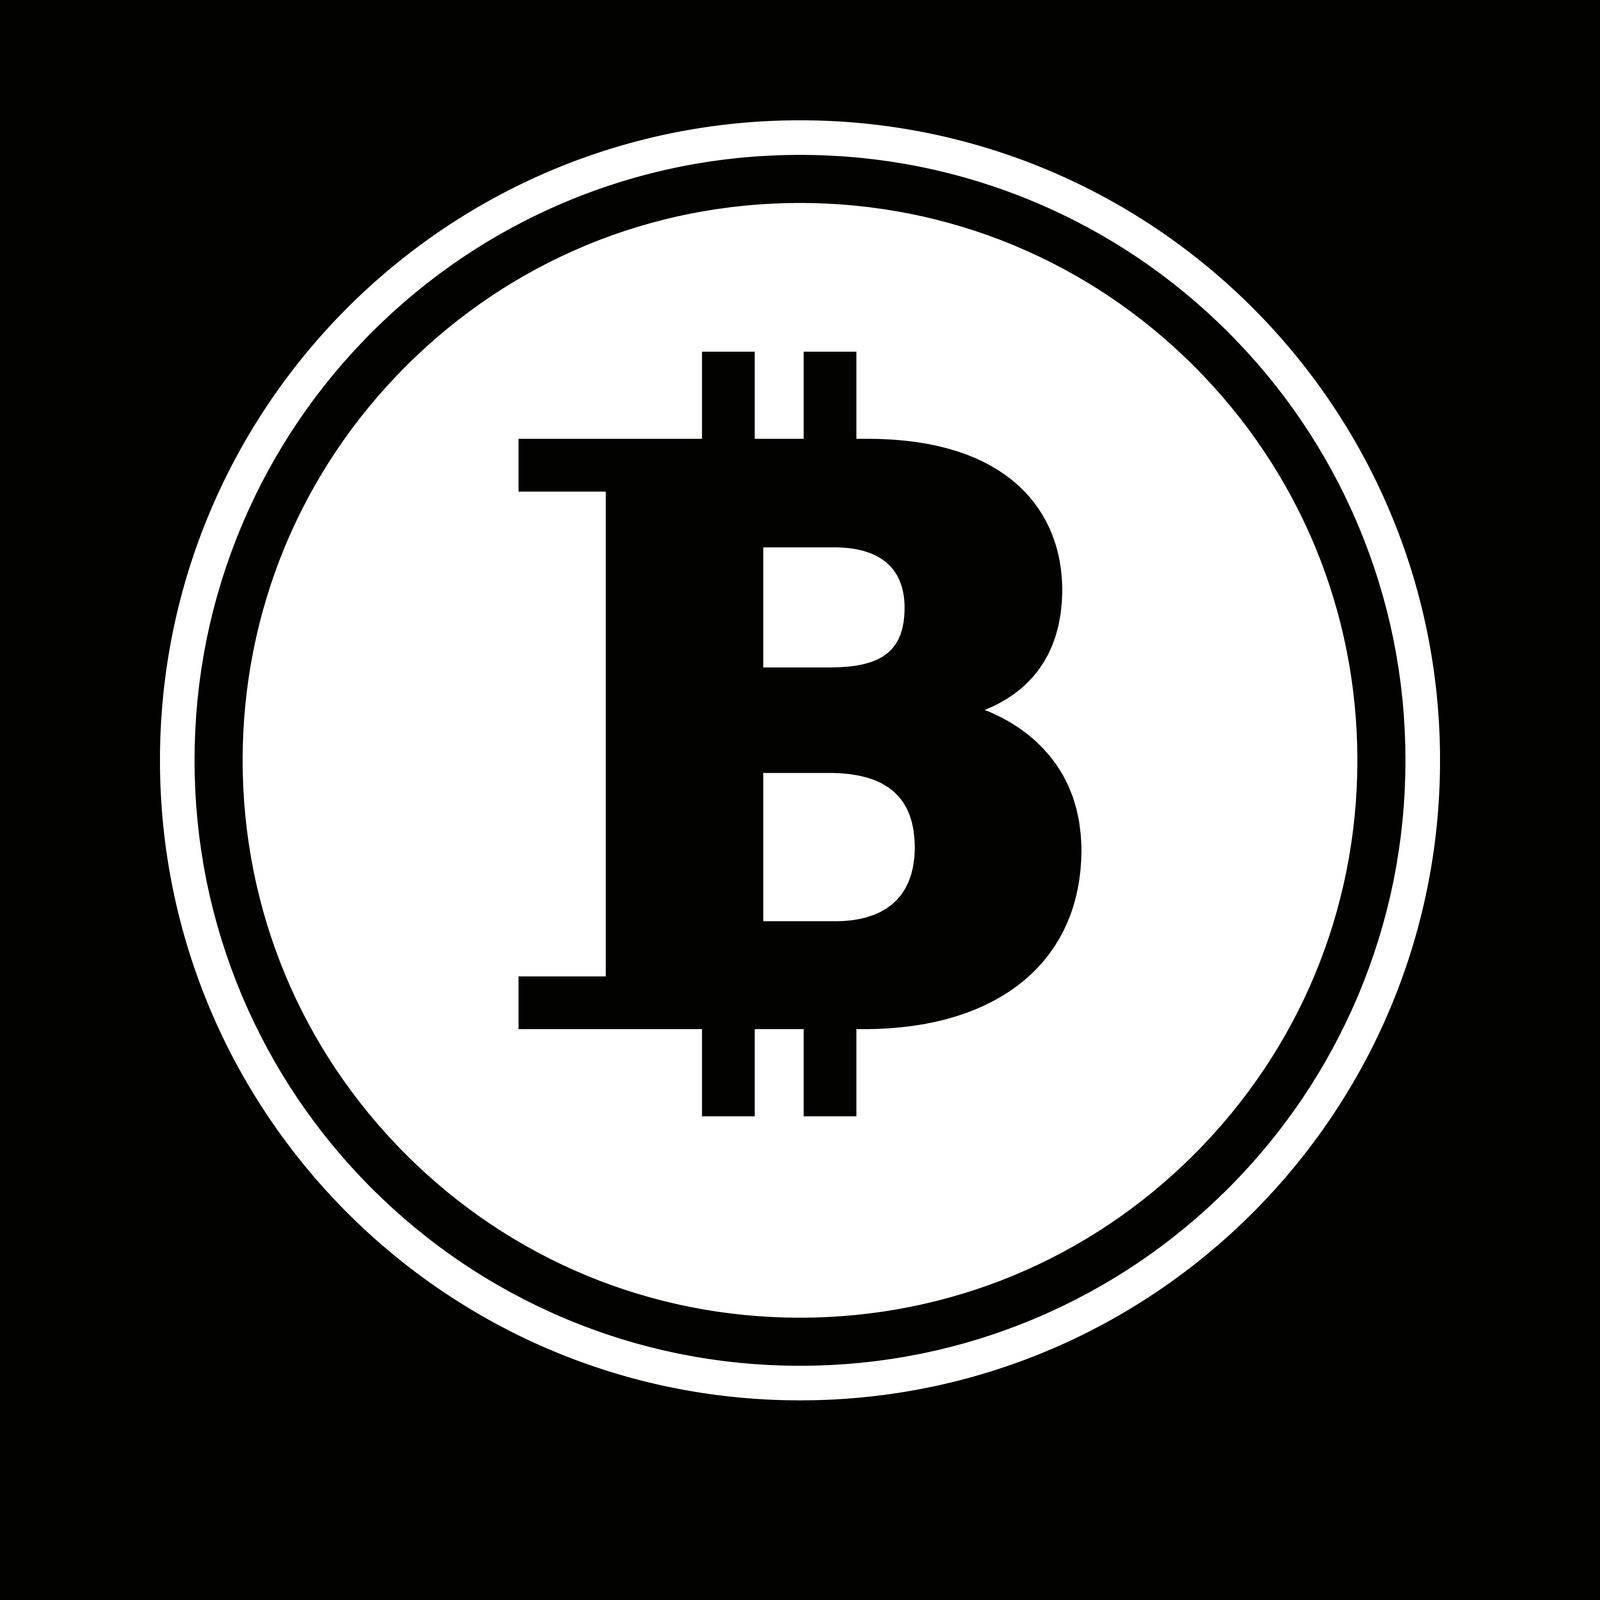 Bitcoin Simple Illustration. cryptographic asset. Editable vector.